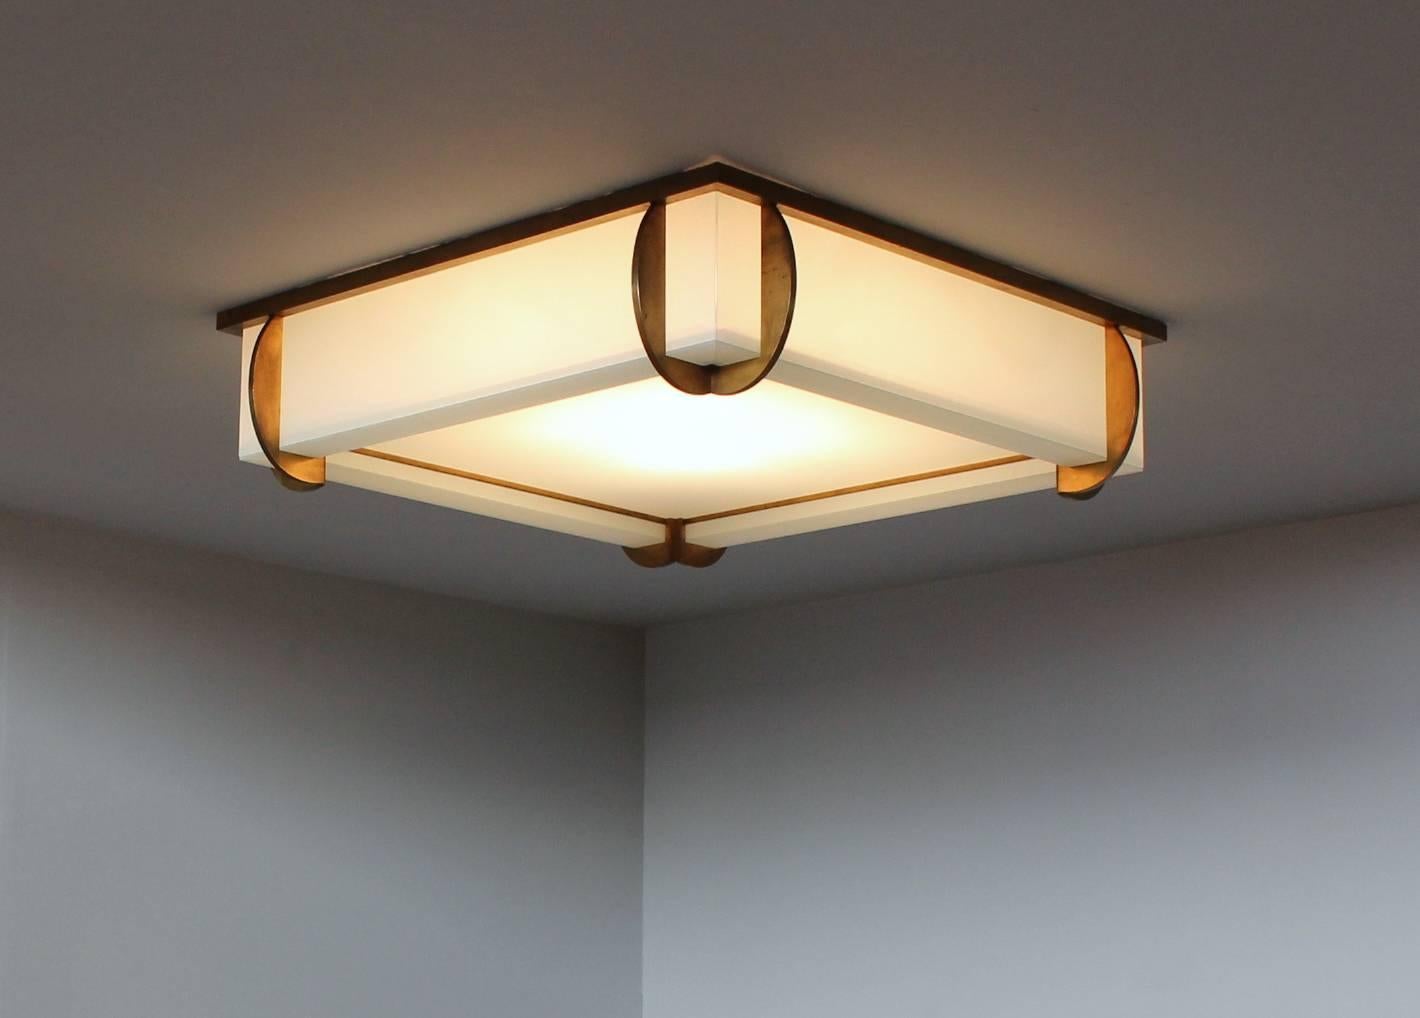 with bronze curved blades on each corner. The bottom square glass diffuser is easy to remove for bulb replacement.